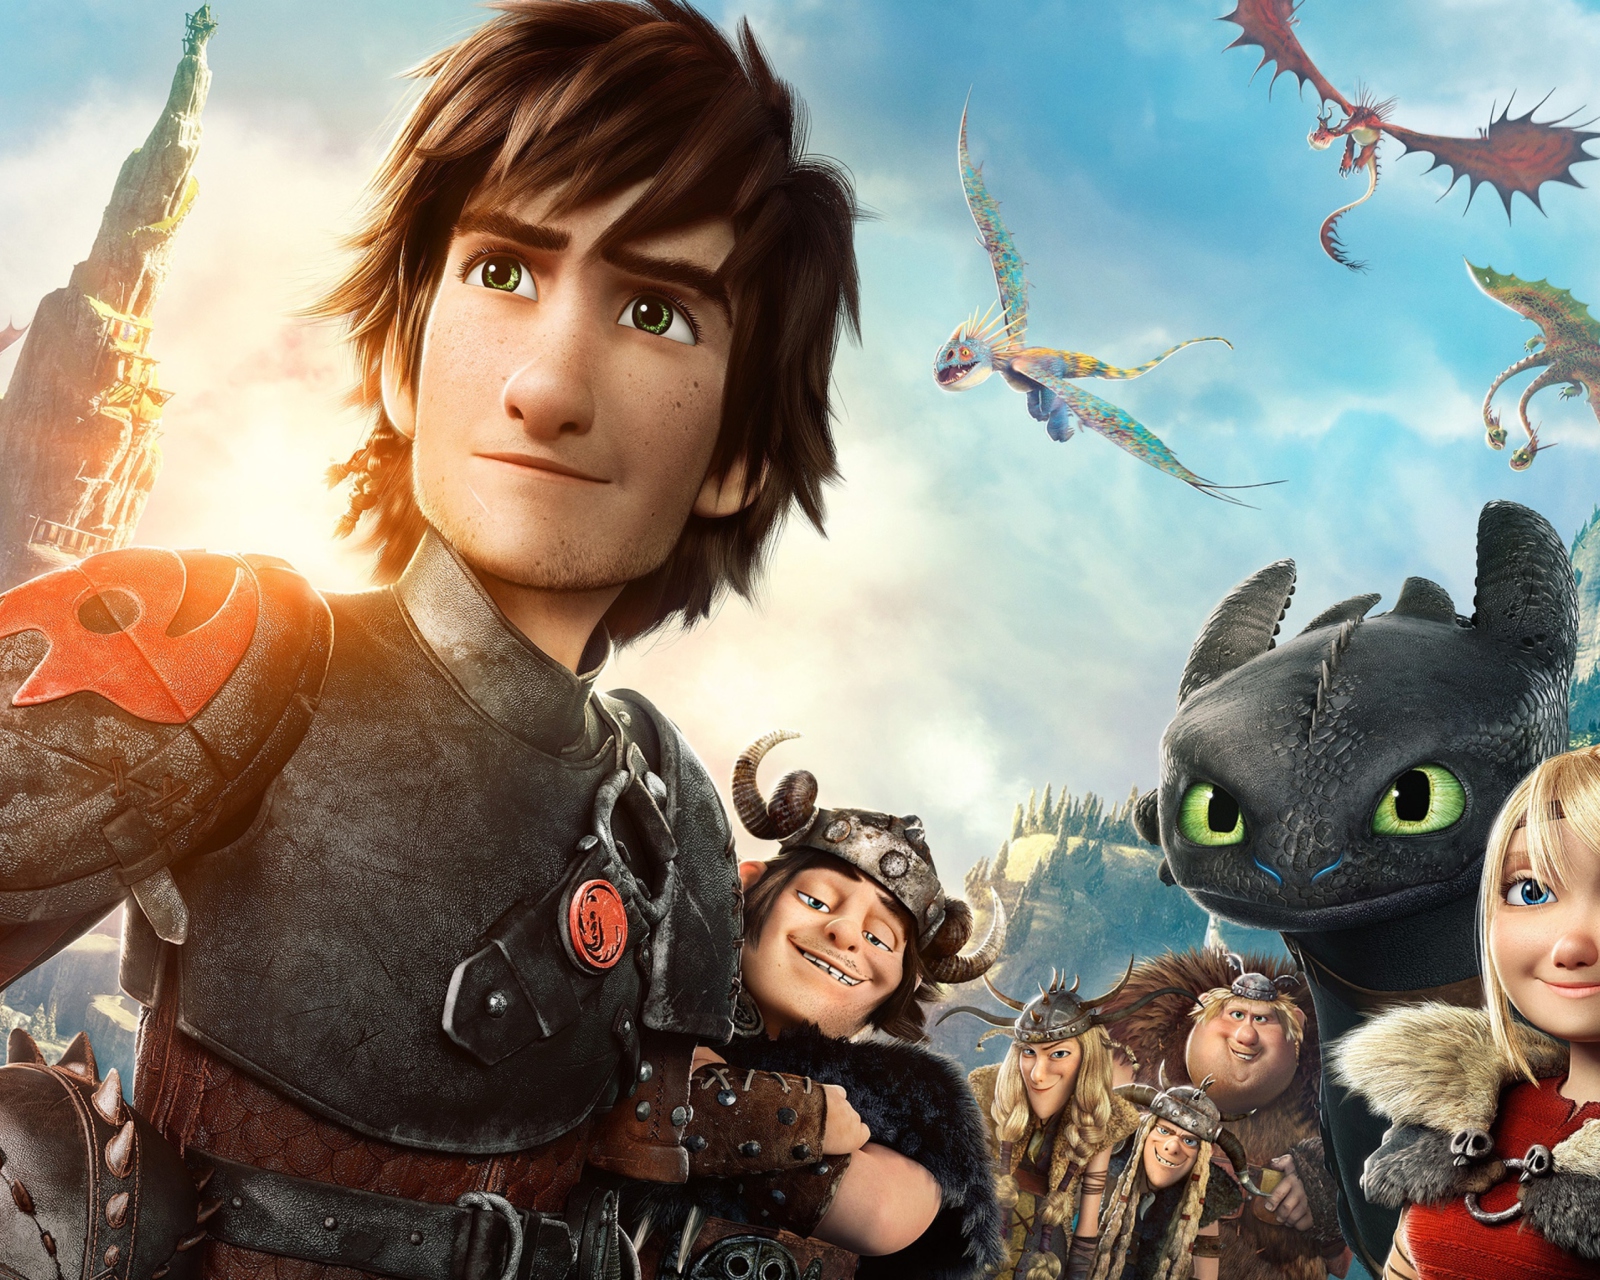 How To Train Your Dragon 2 wallpaper 1600x1280